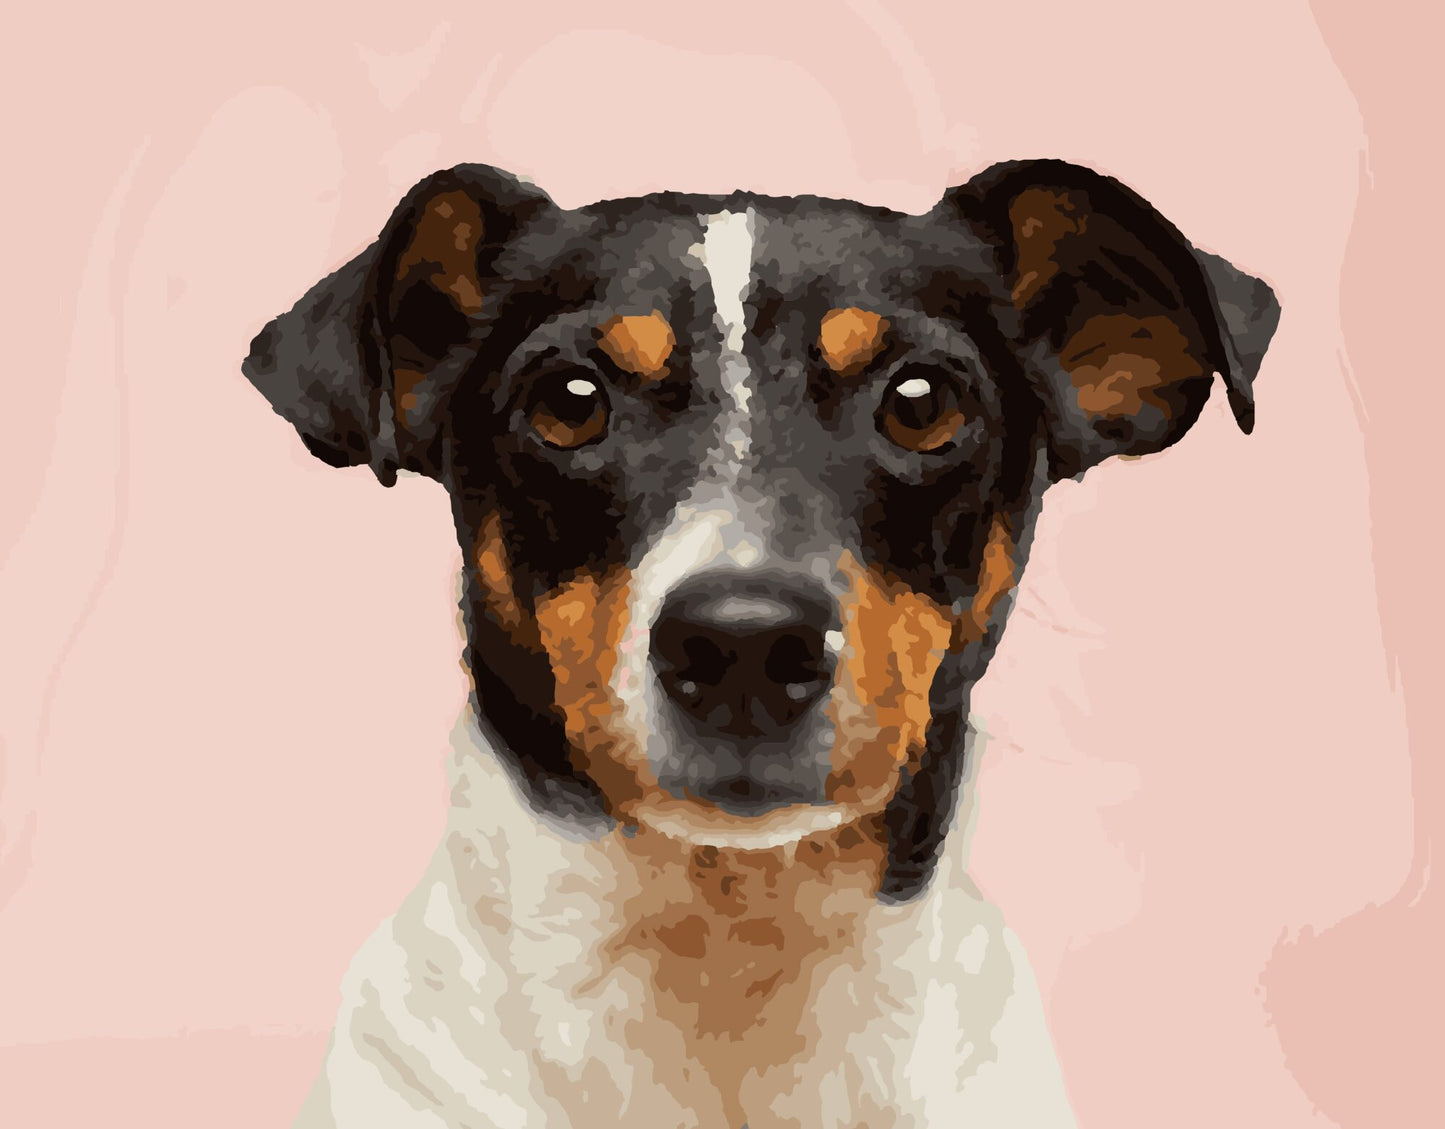 Digital painting by numbers, dog, Jack Russell